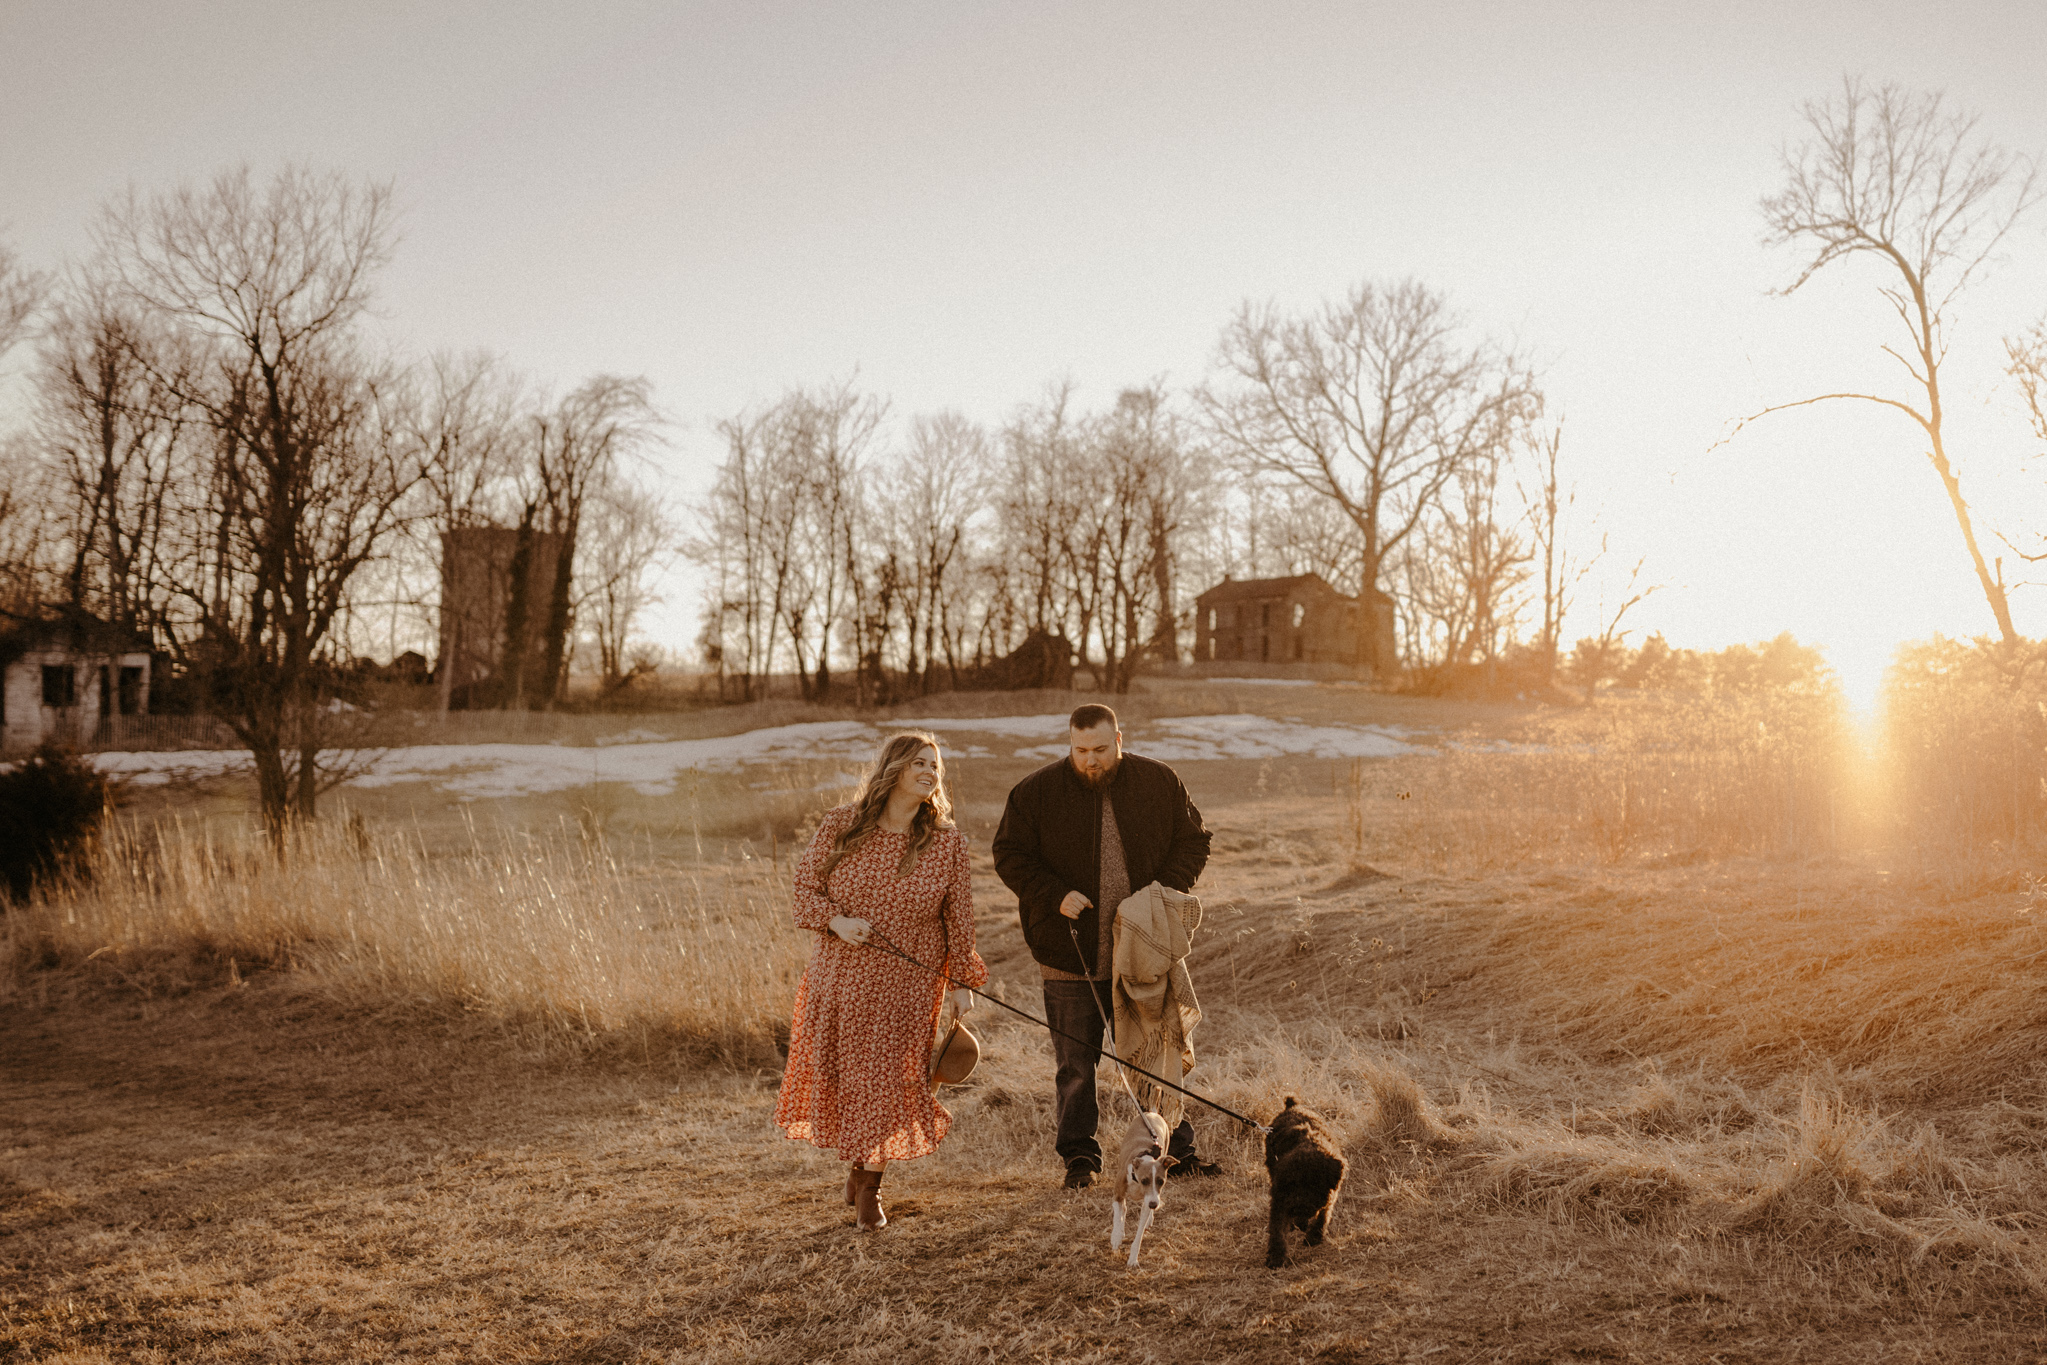 Outdoor sunny engagement session in the grassy fields of Harpers Ferry, what to wear to an engagement session, long flowy patterned maxi dress